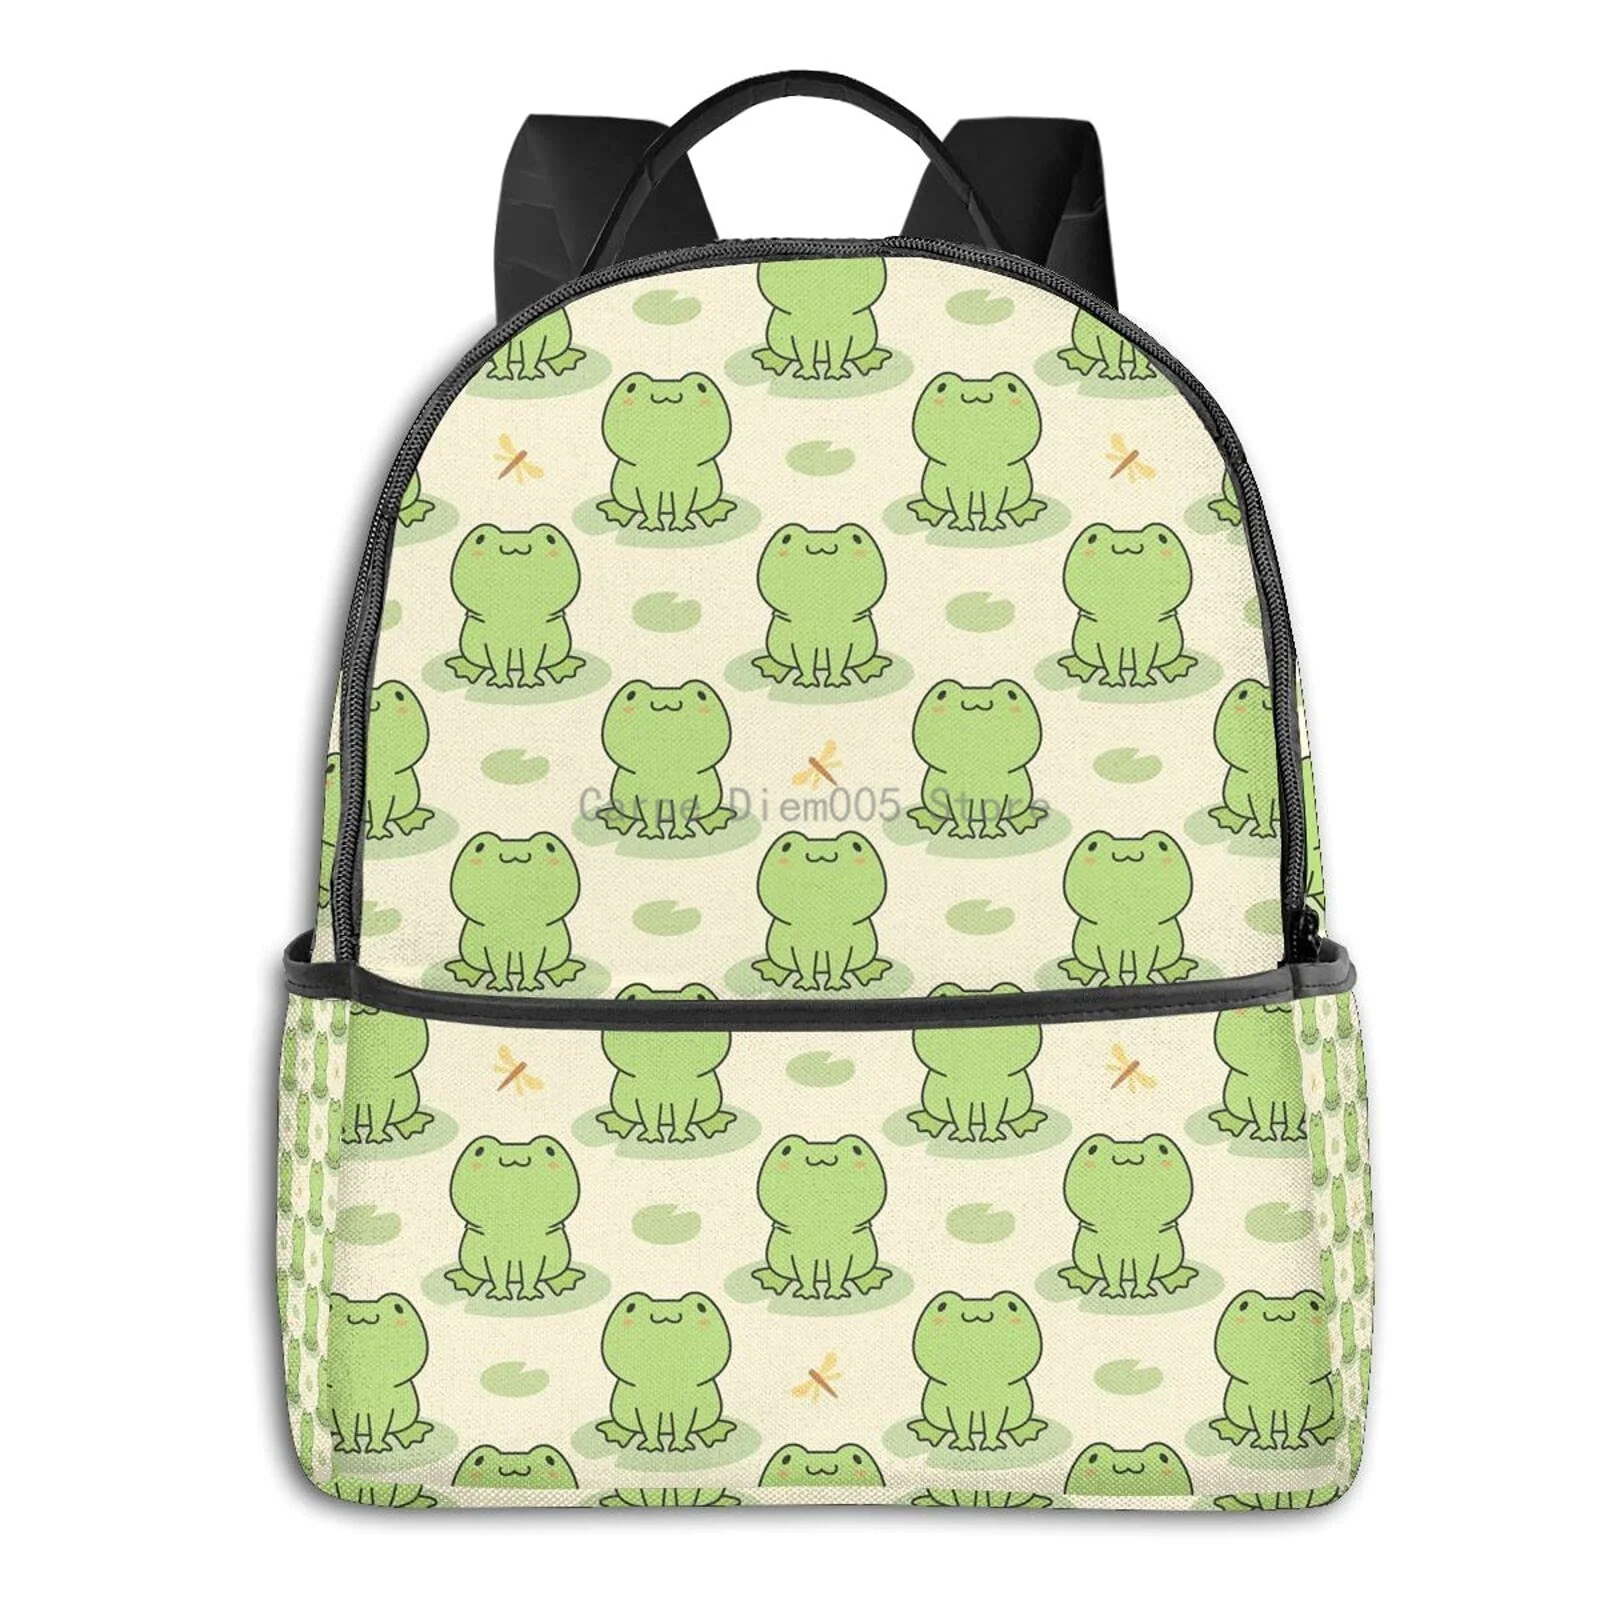 Cute Cartoon Frog and Dragonfly Backpack for Mens Womens School Travel Shoulder Backpack